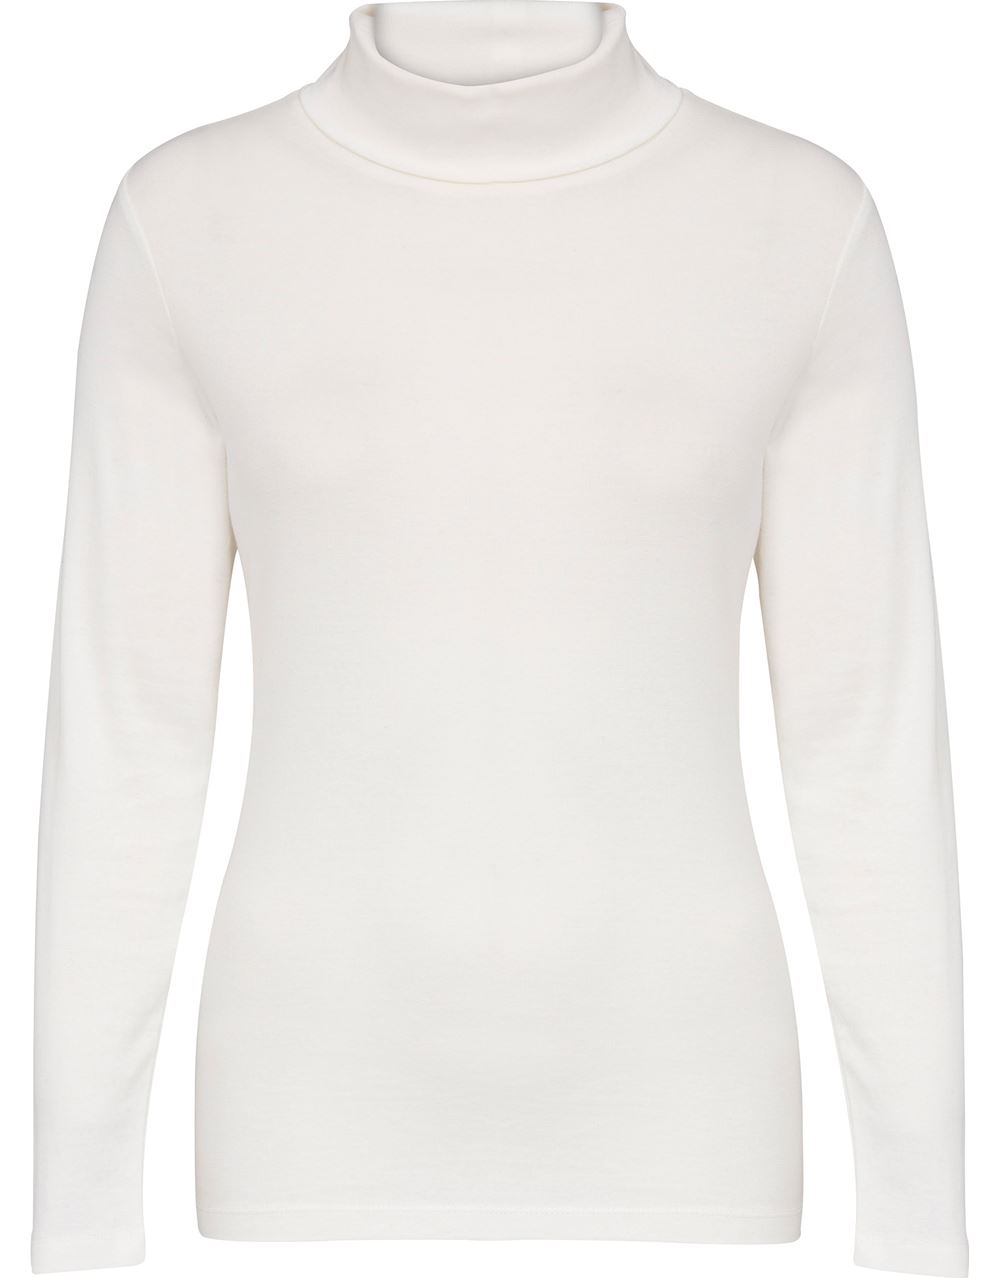 Long Sleeve Turtle Neck Jersey Top